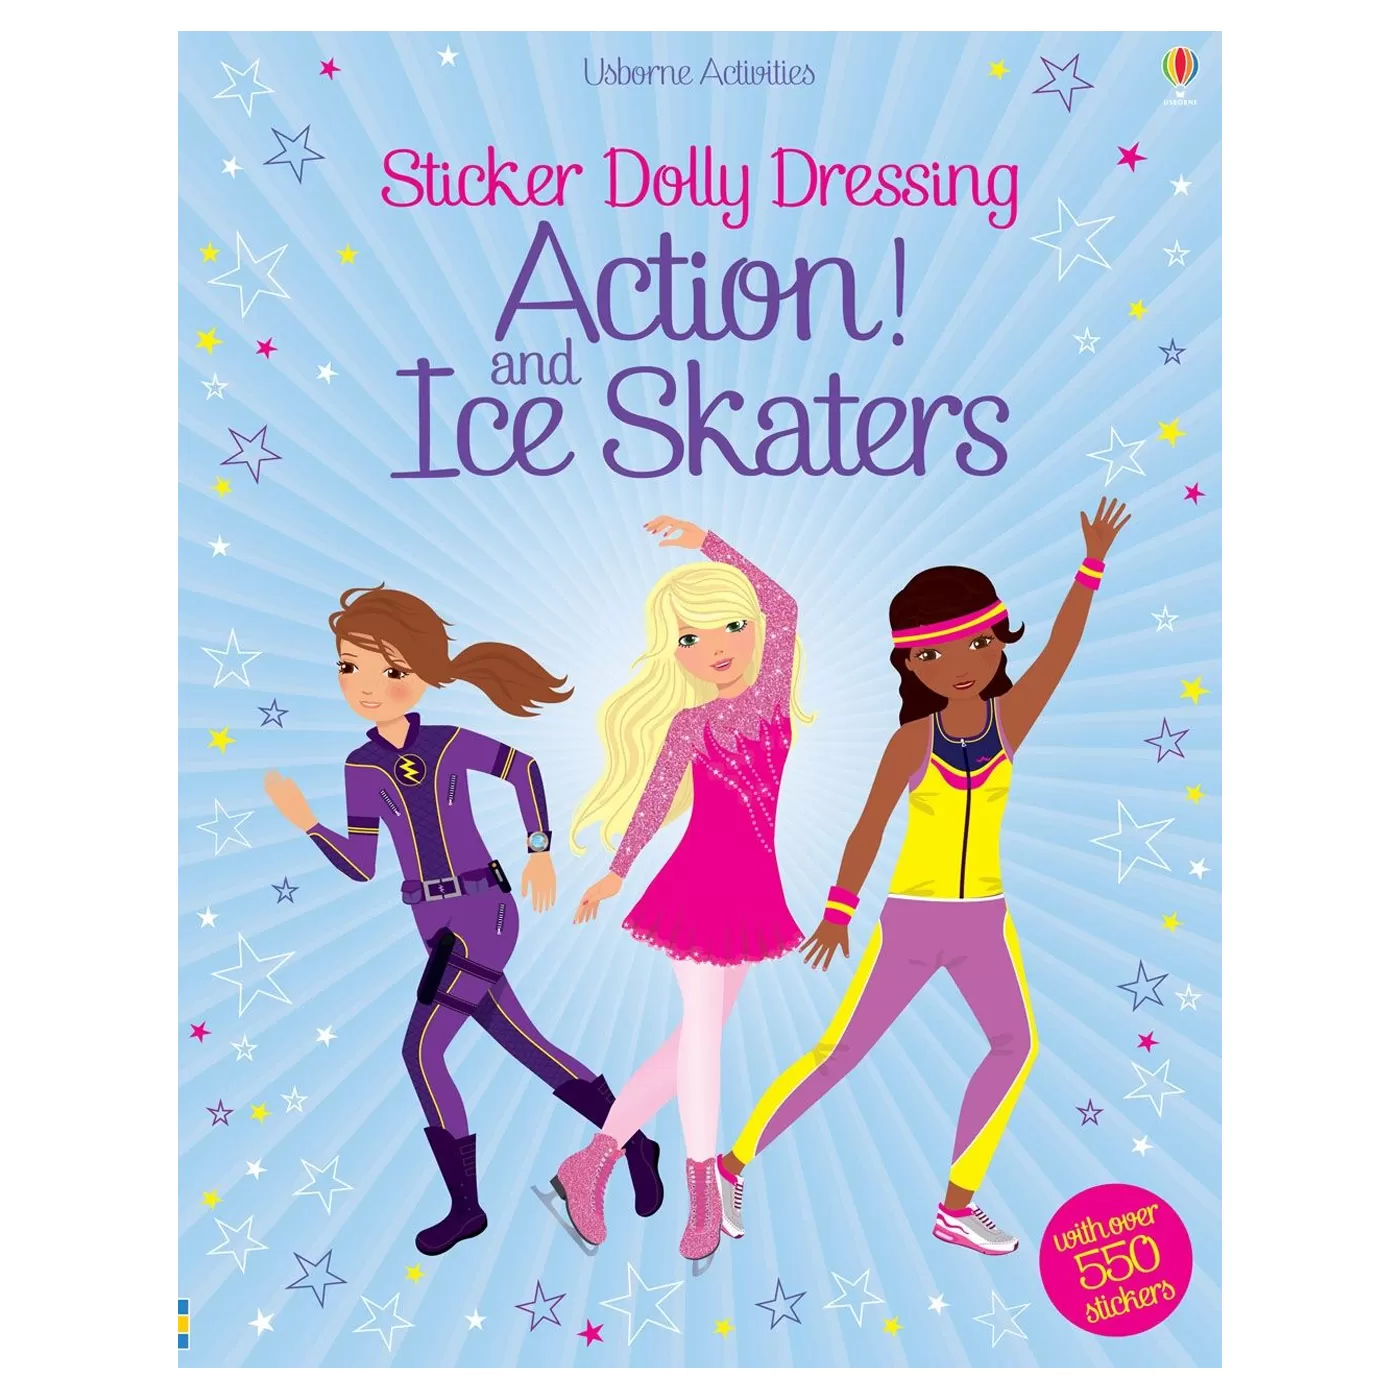  Sticker Dolly Dressing Action! and Ice Skaters